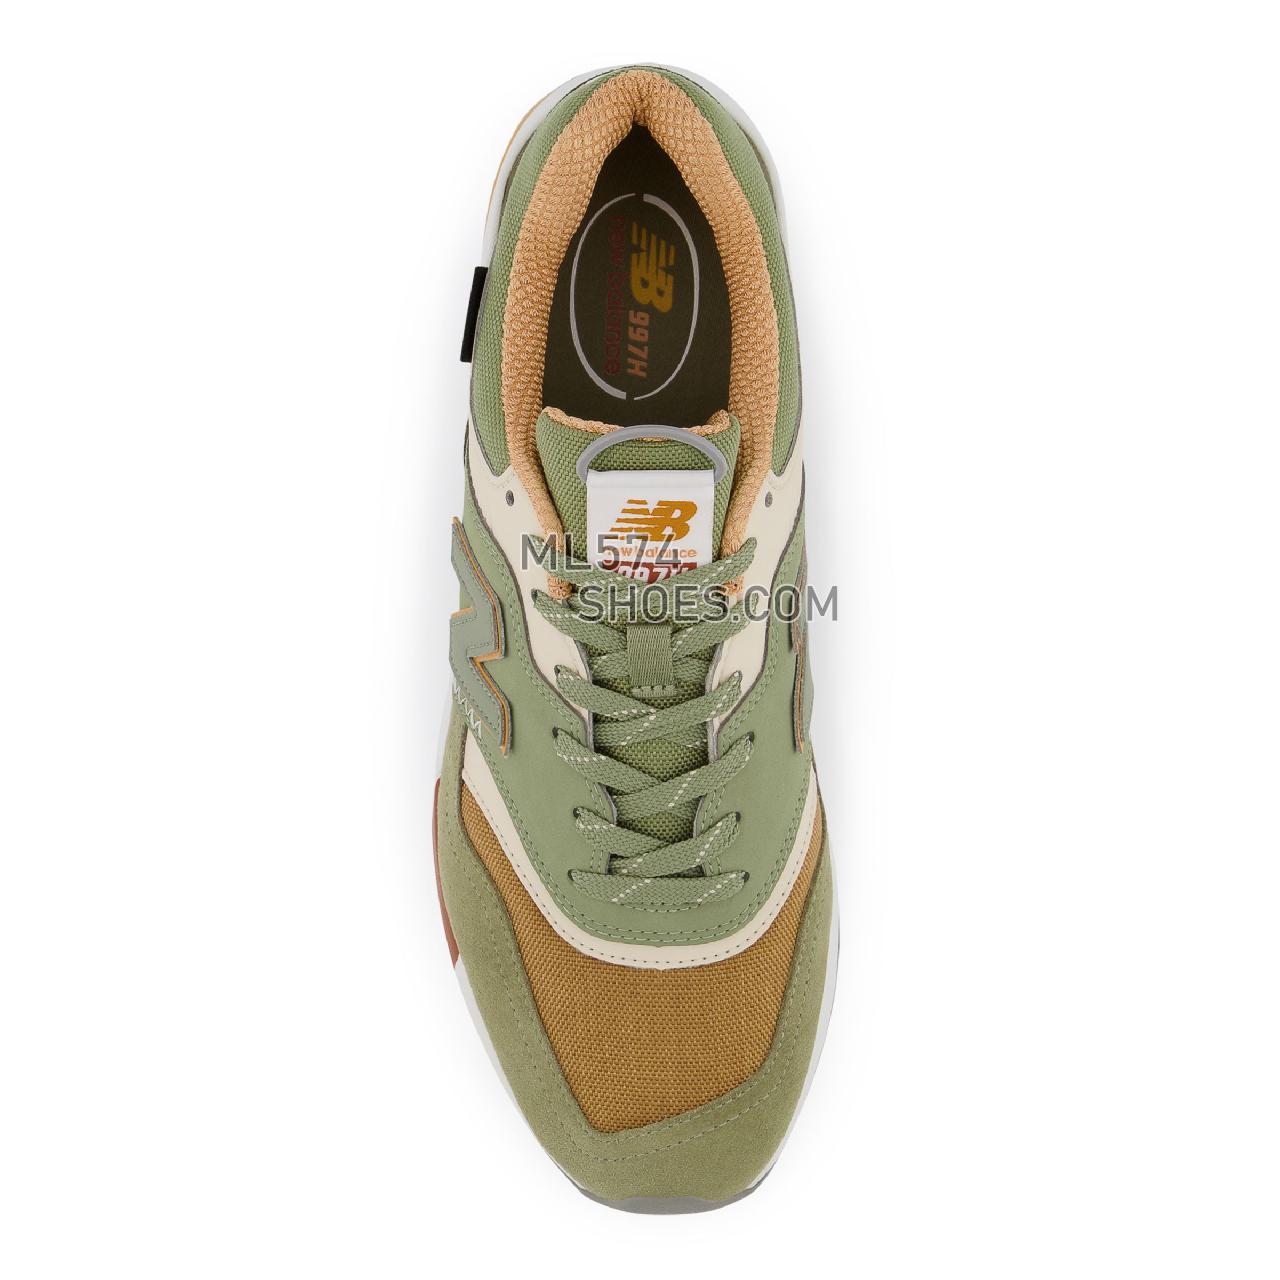 New Balance 997H - Men's Sport Style Sneakers - True Camo with Golden Hour - CM997HTJ